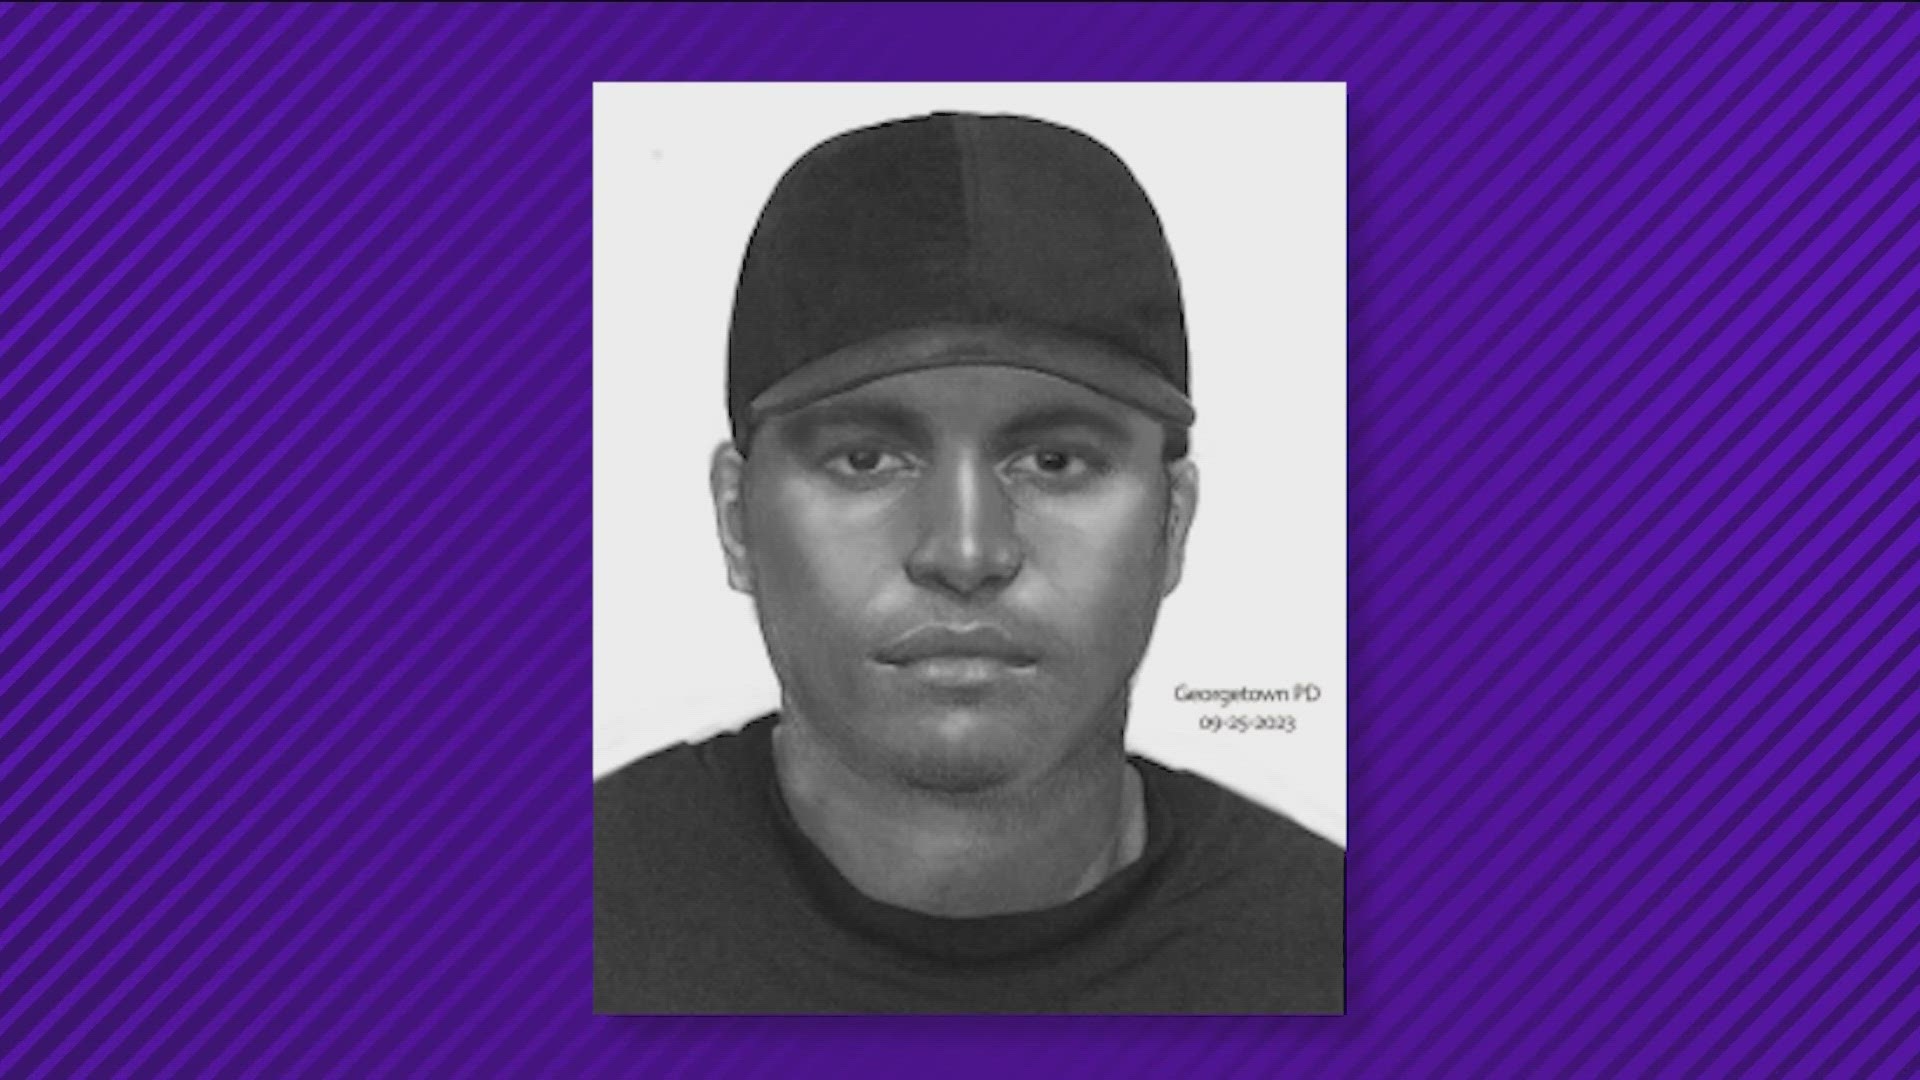 Police have released a sketch of the man who abducted a 9-year-old girl from her home in Georgetown last month.